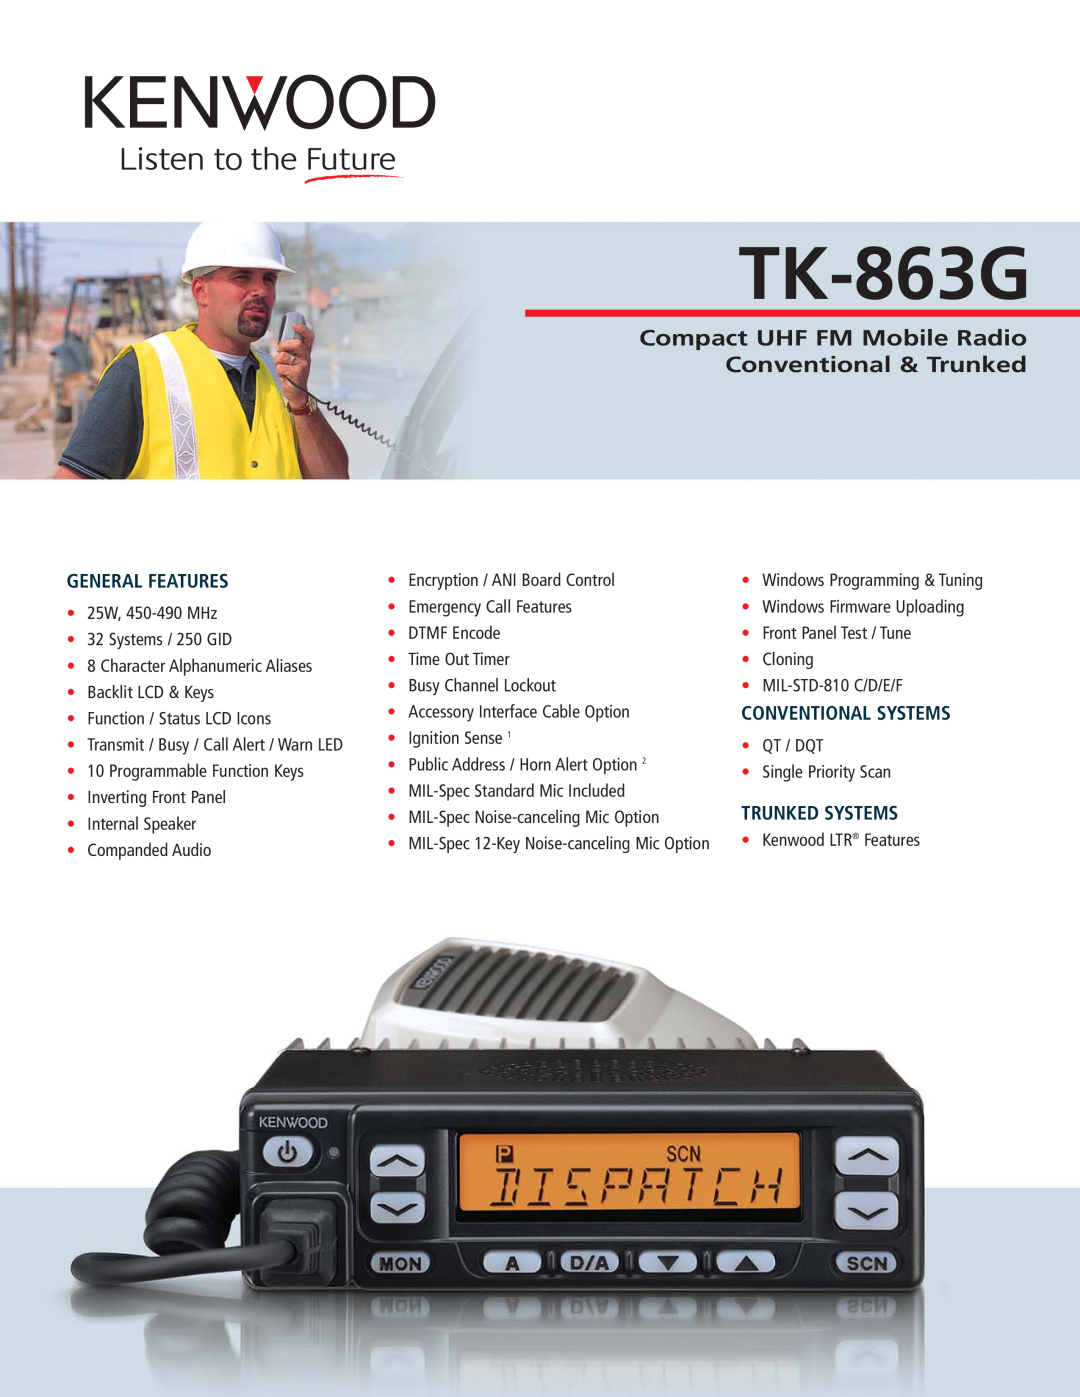 Kenwood TK-863G manual Compact UHF FM Mobile Radio Conventional & Trunked, General Features, Trunked Systems 